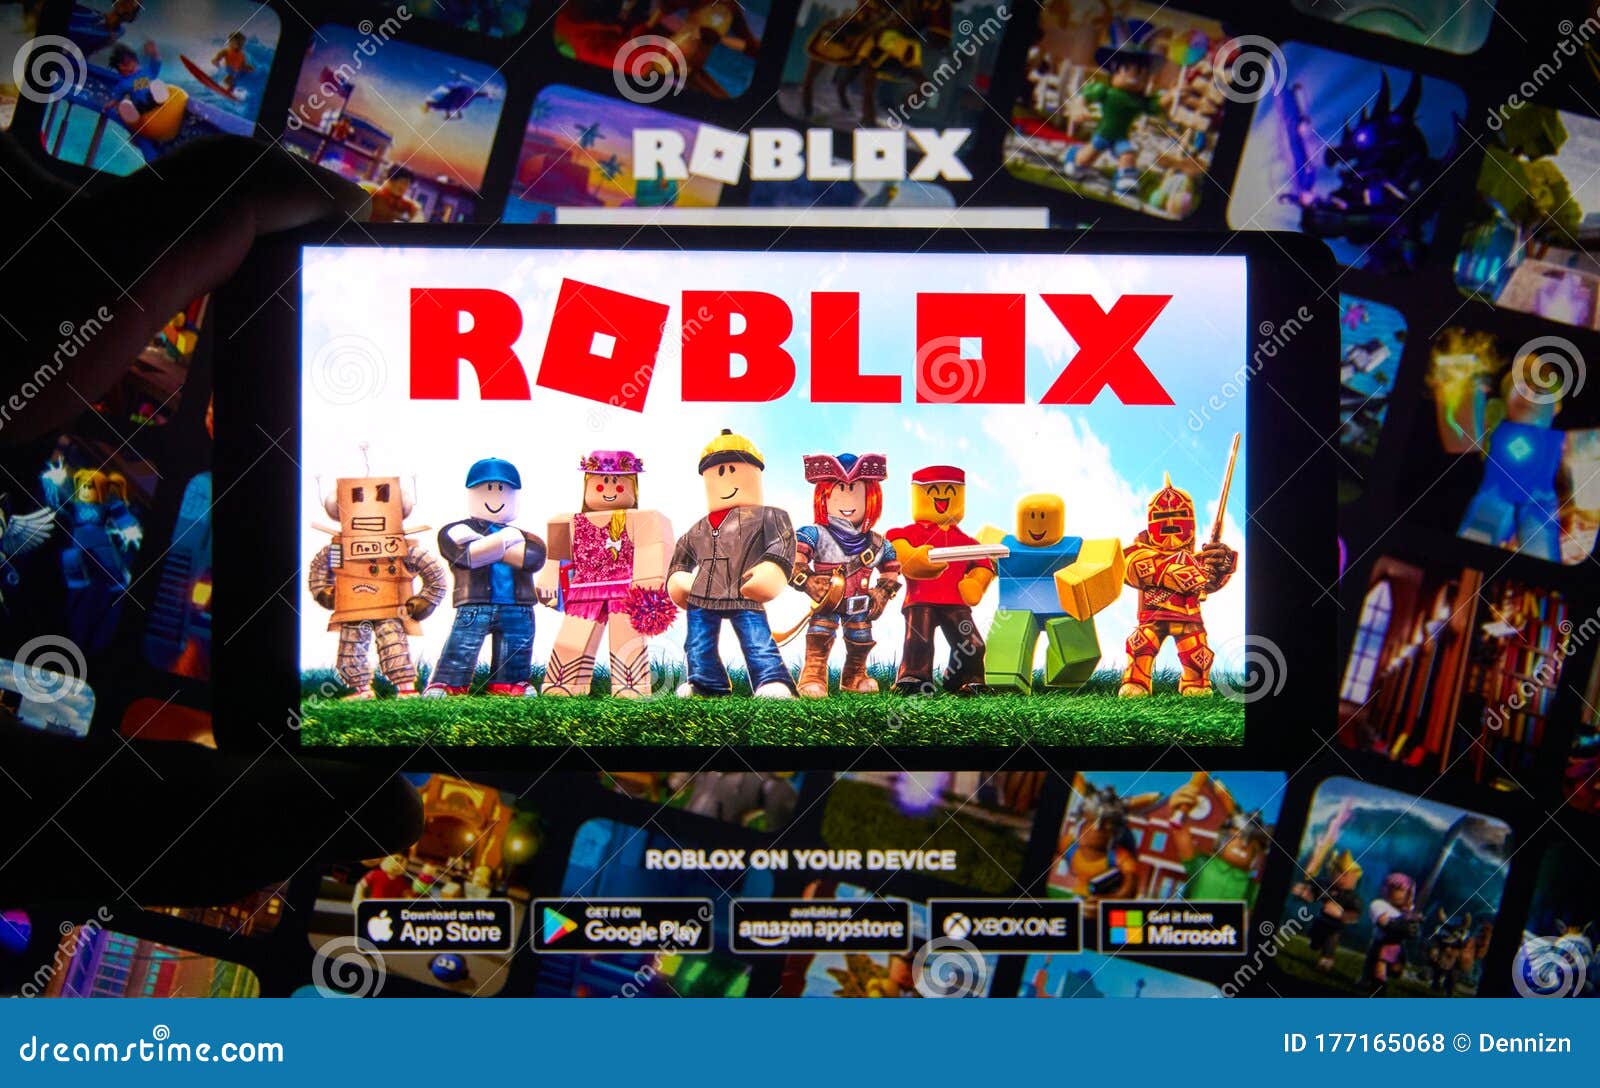 54 Roblox Photos Free Royalty Free Stock Photos From Dreamstime - roblox logo ids list